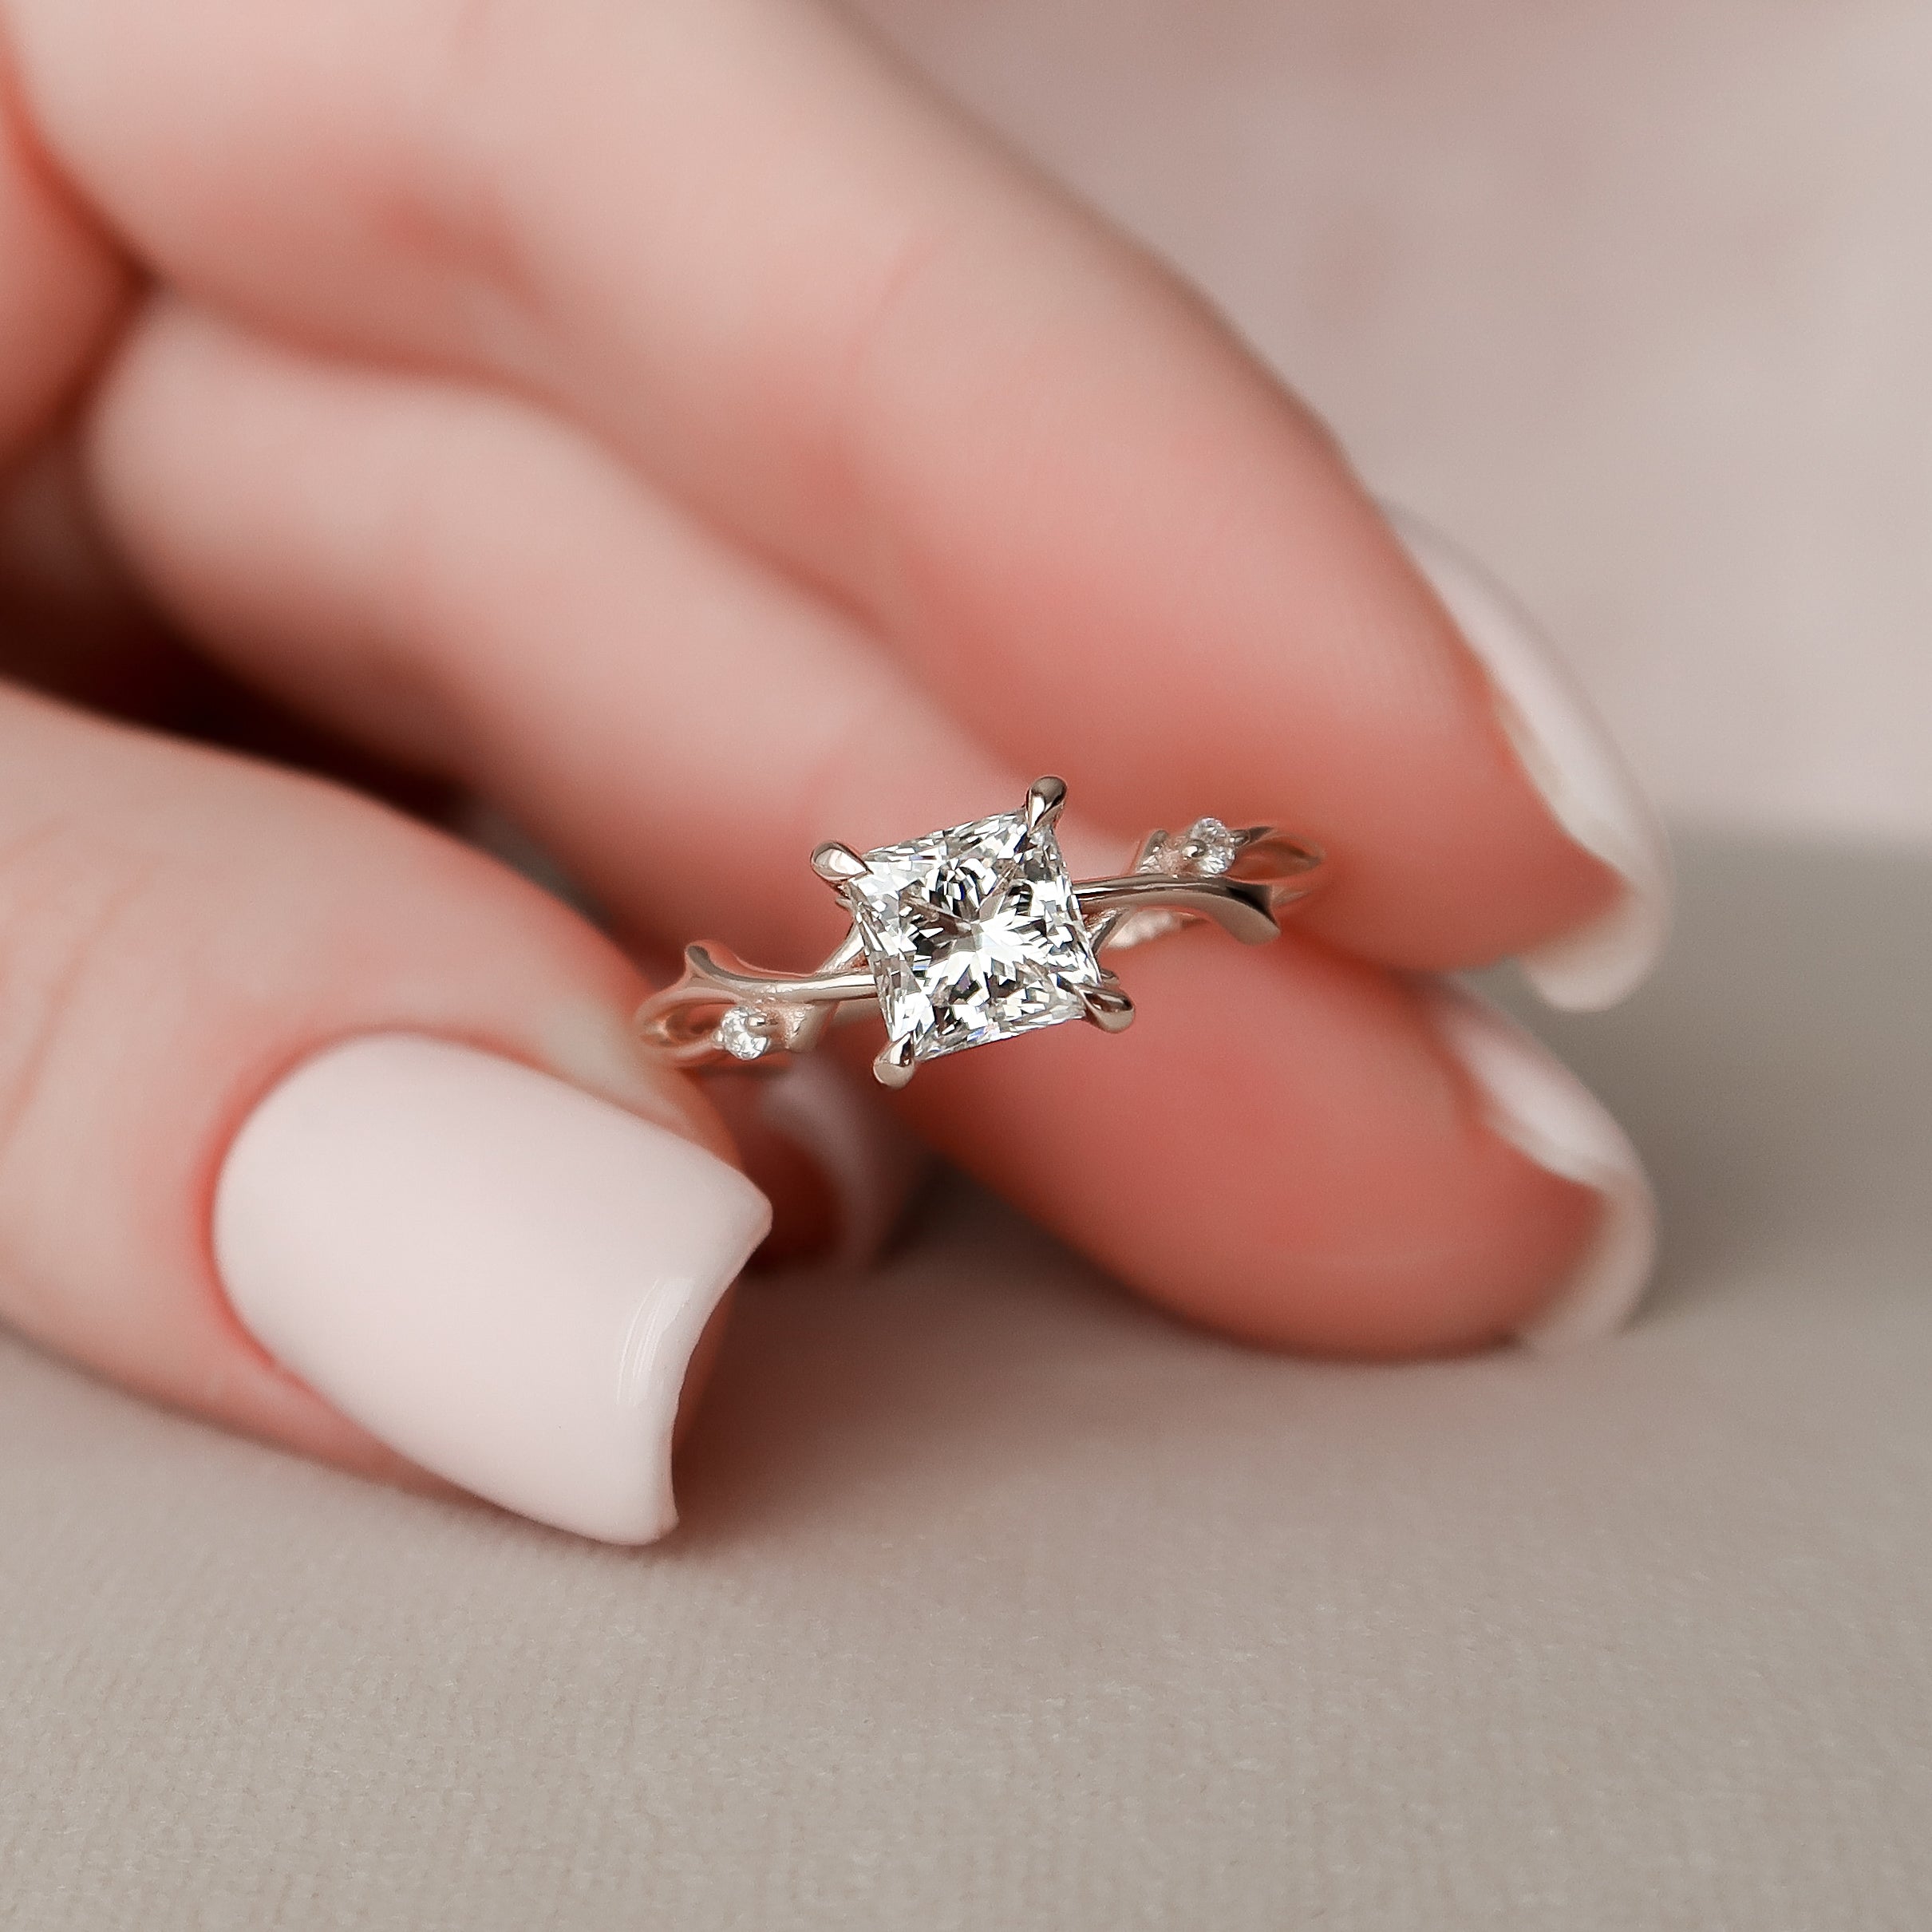 Promise Ring vs. Engagement Ring, What is the Difference? - DR Blog